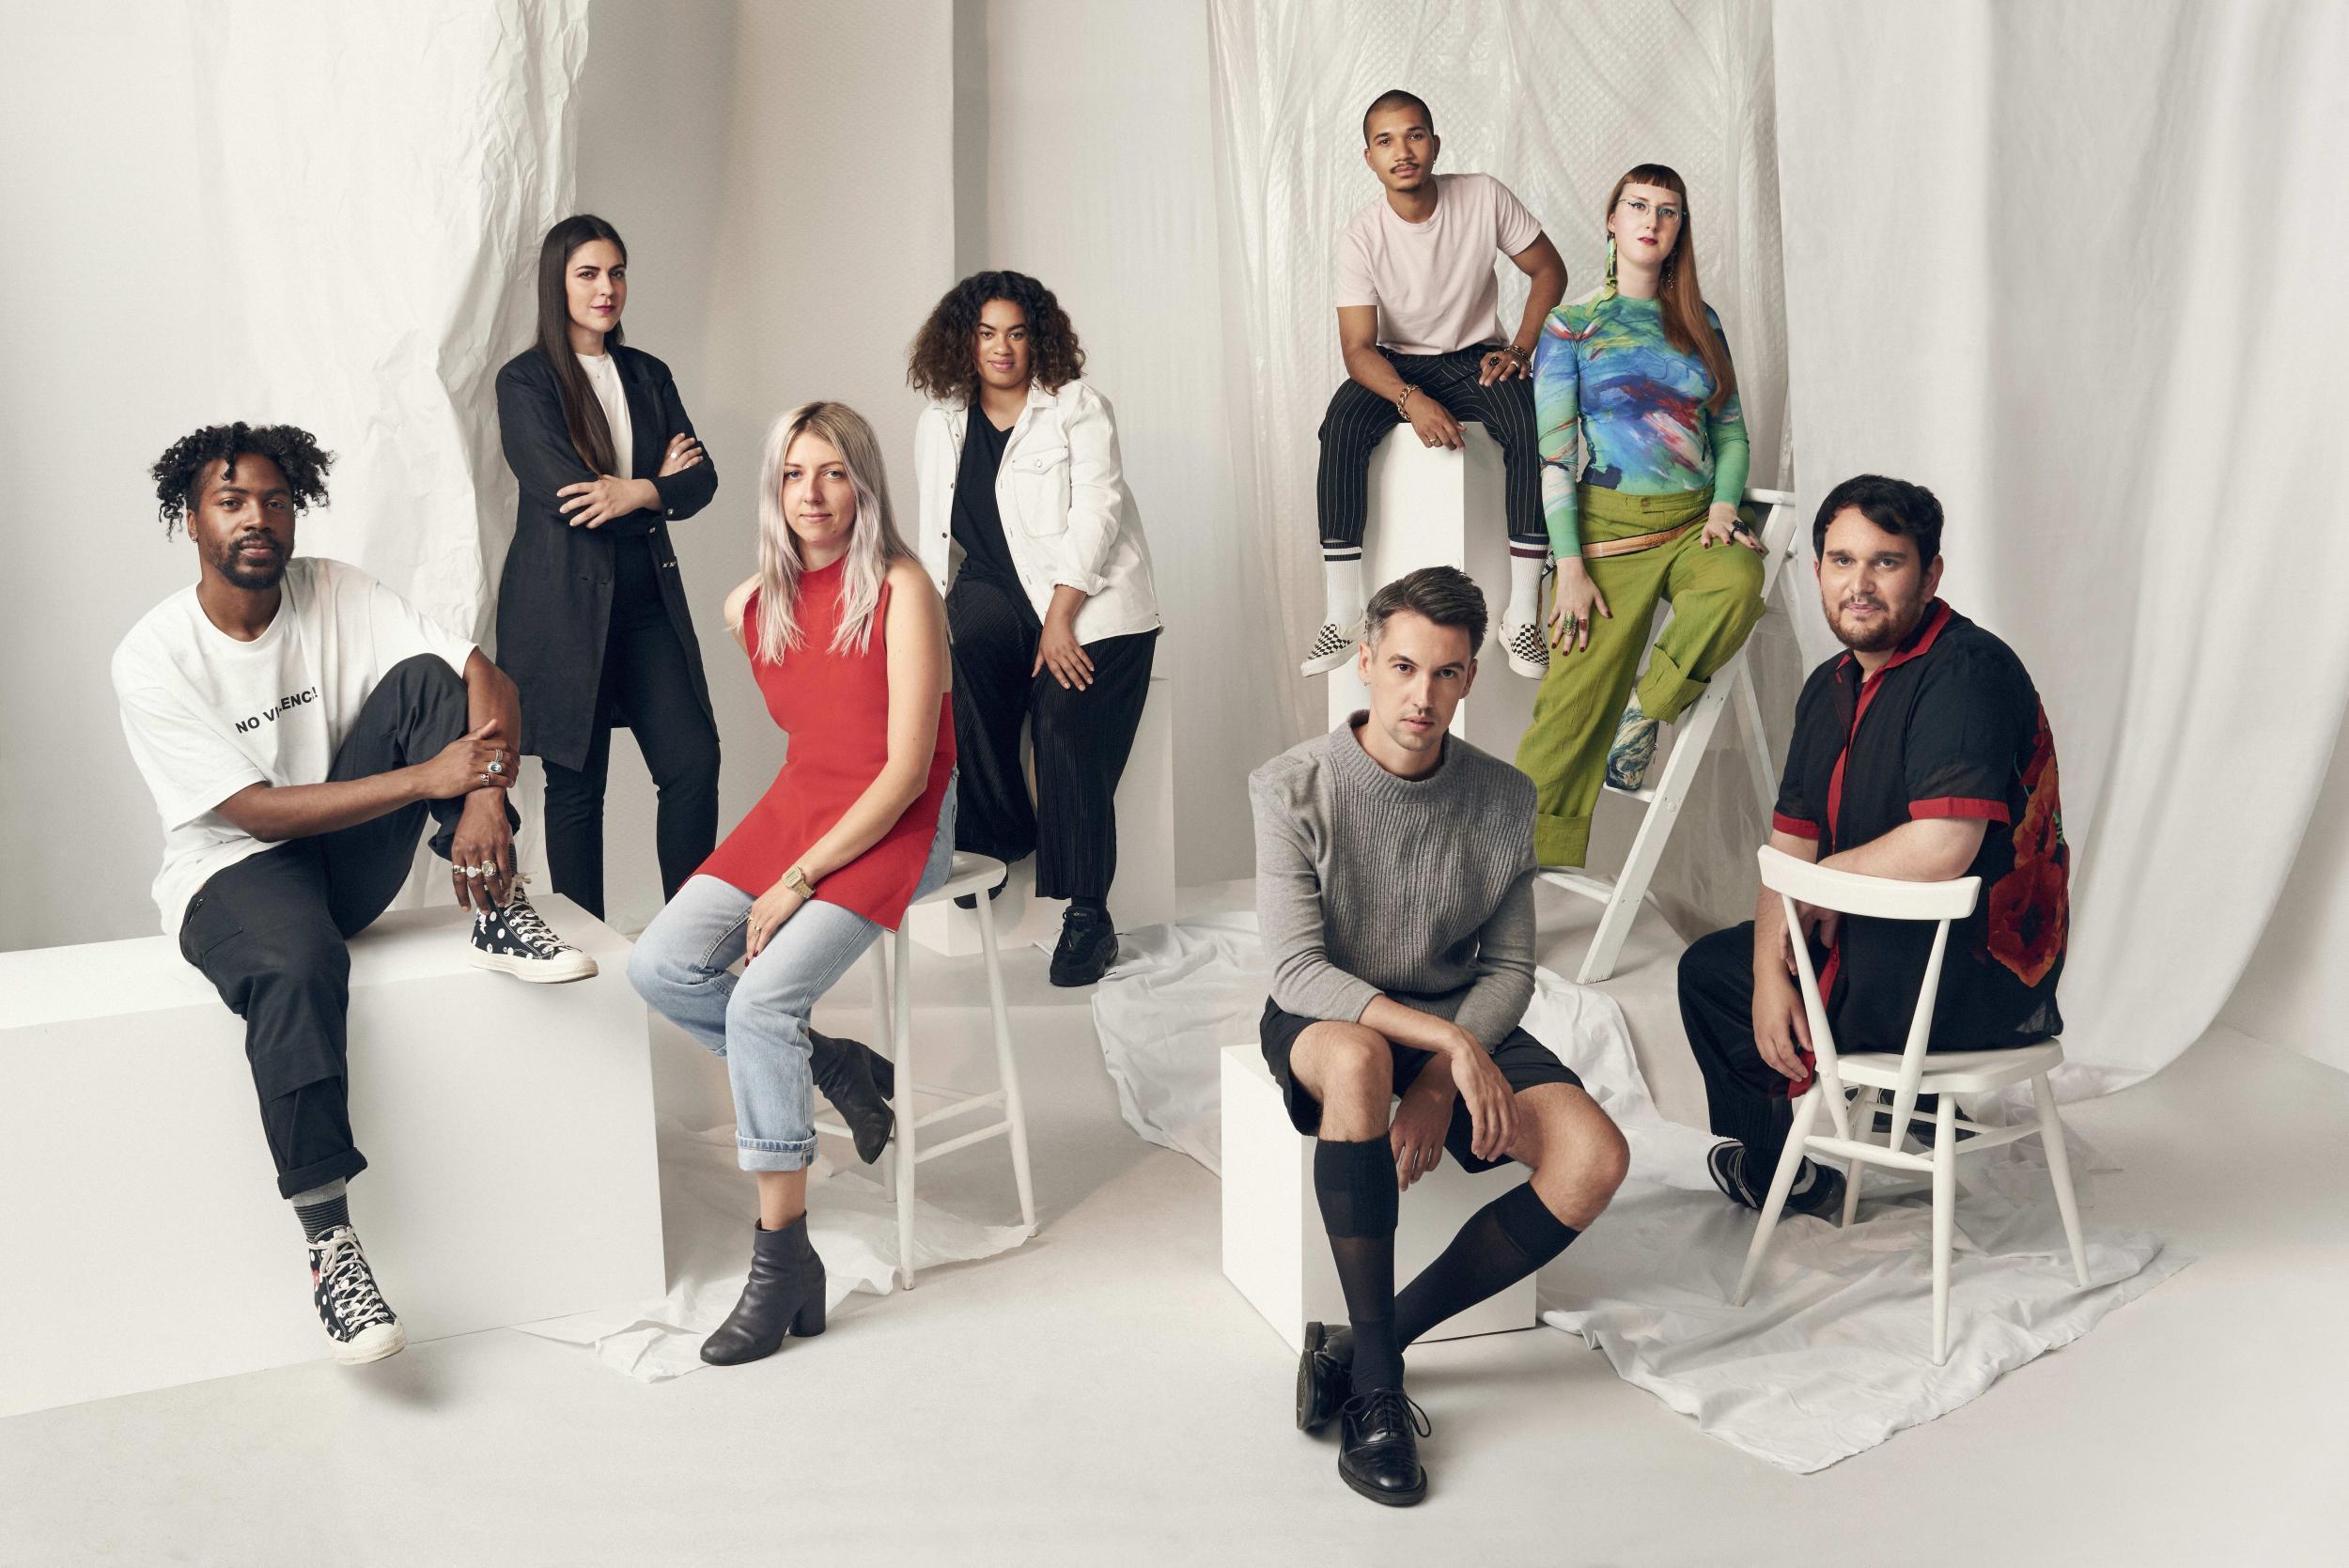 Meet the designers (from left to right): Joel Boyd, Pelin Isildak, Stacey Wall, Hannah Wallace, Daniel Crabtree, Kyle Lo Monaco, Rose Danford-Phillips and Matthew Duffy